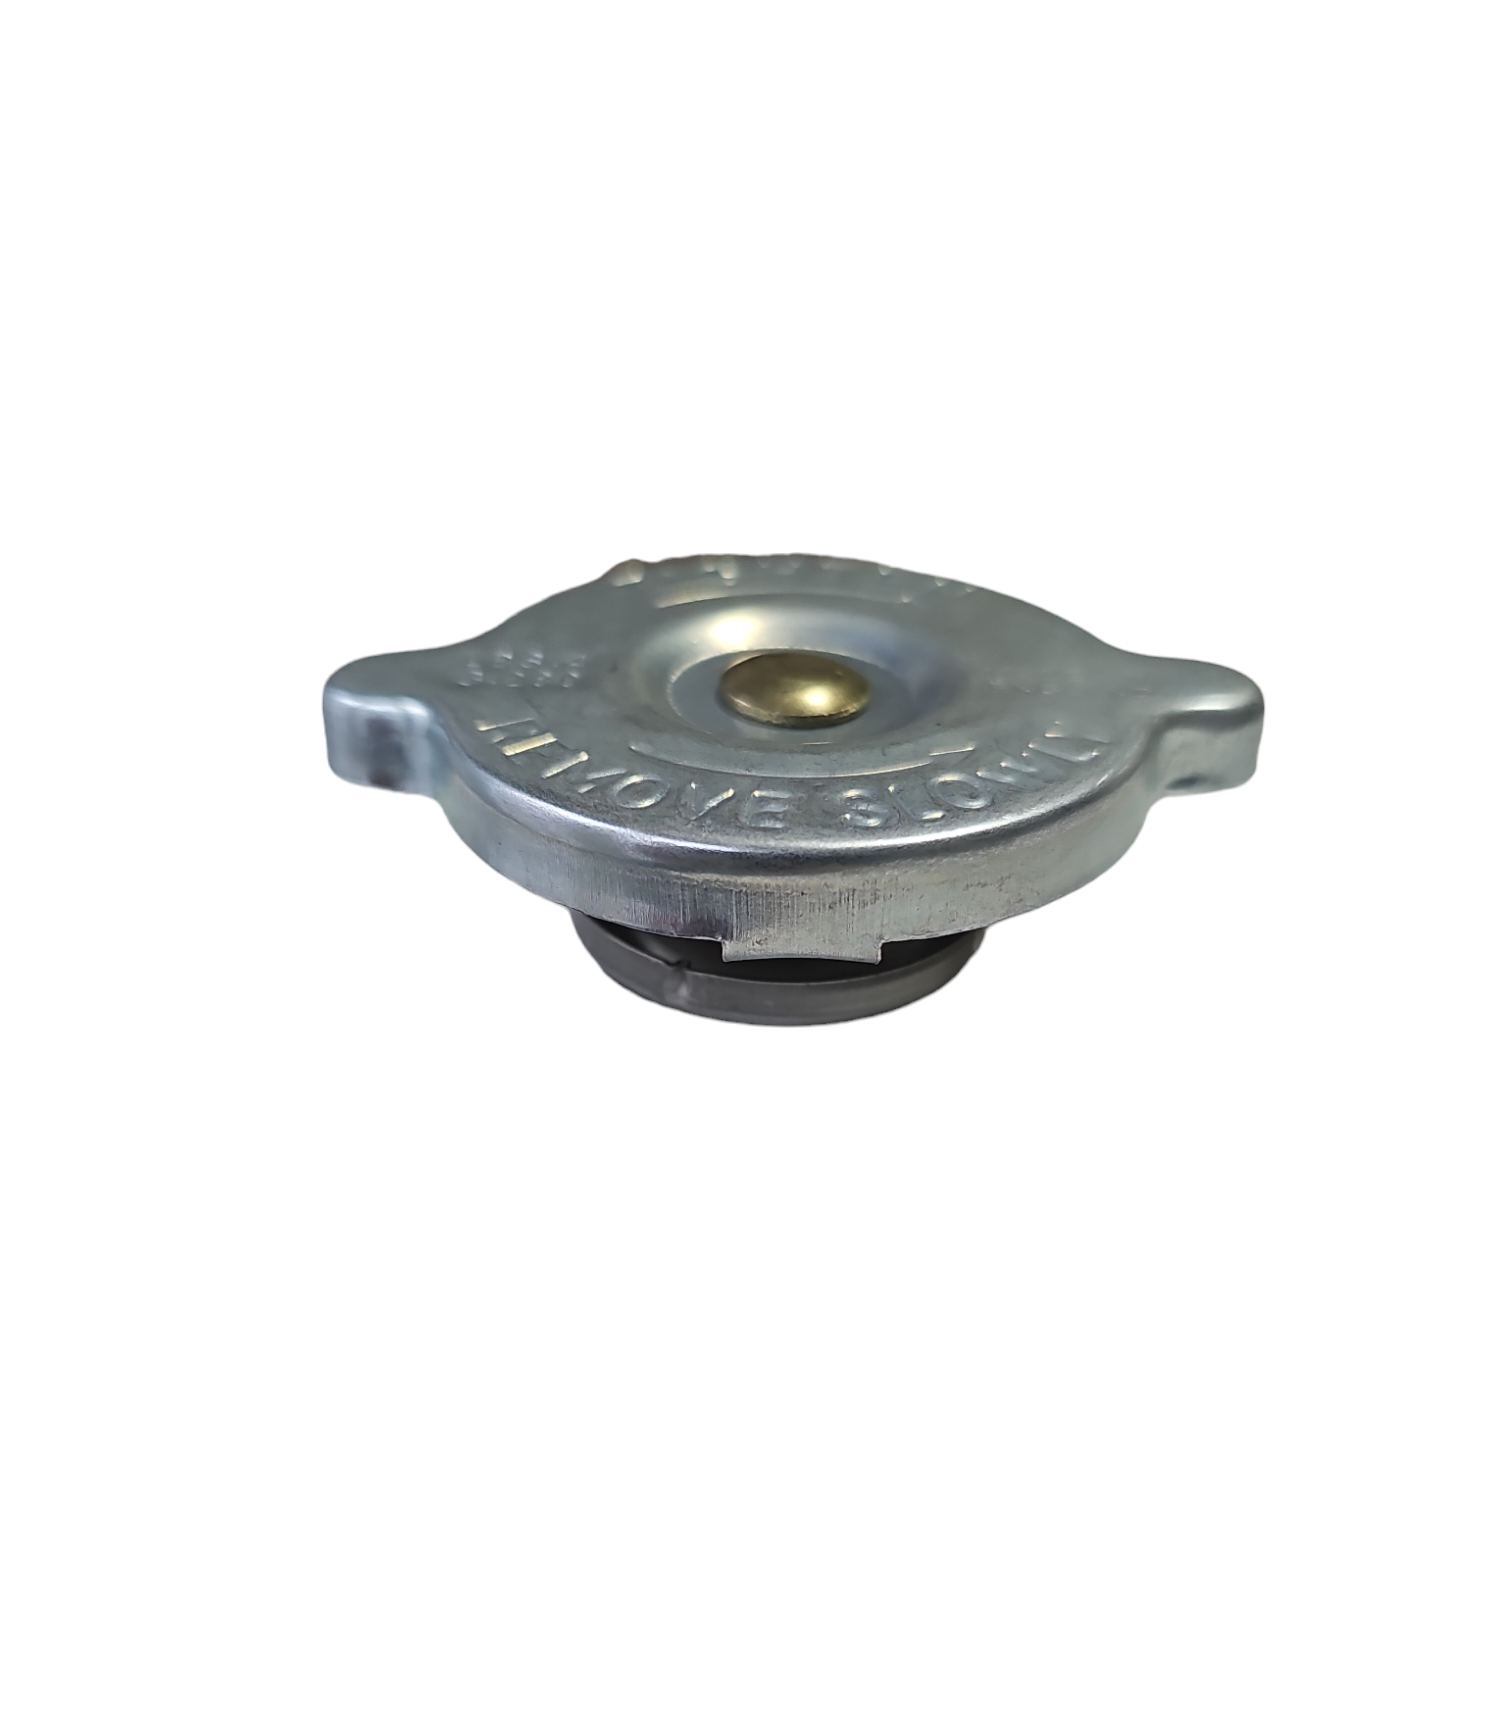 side view of a radiator cap